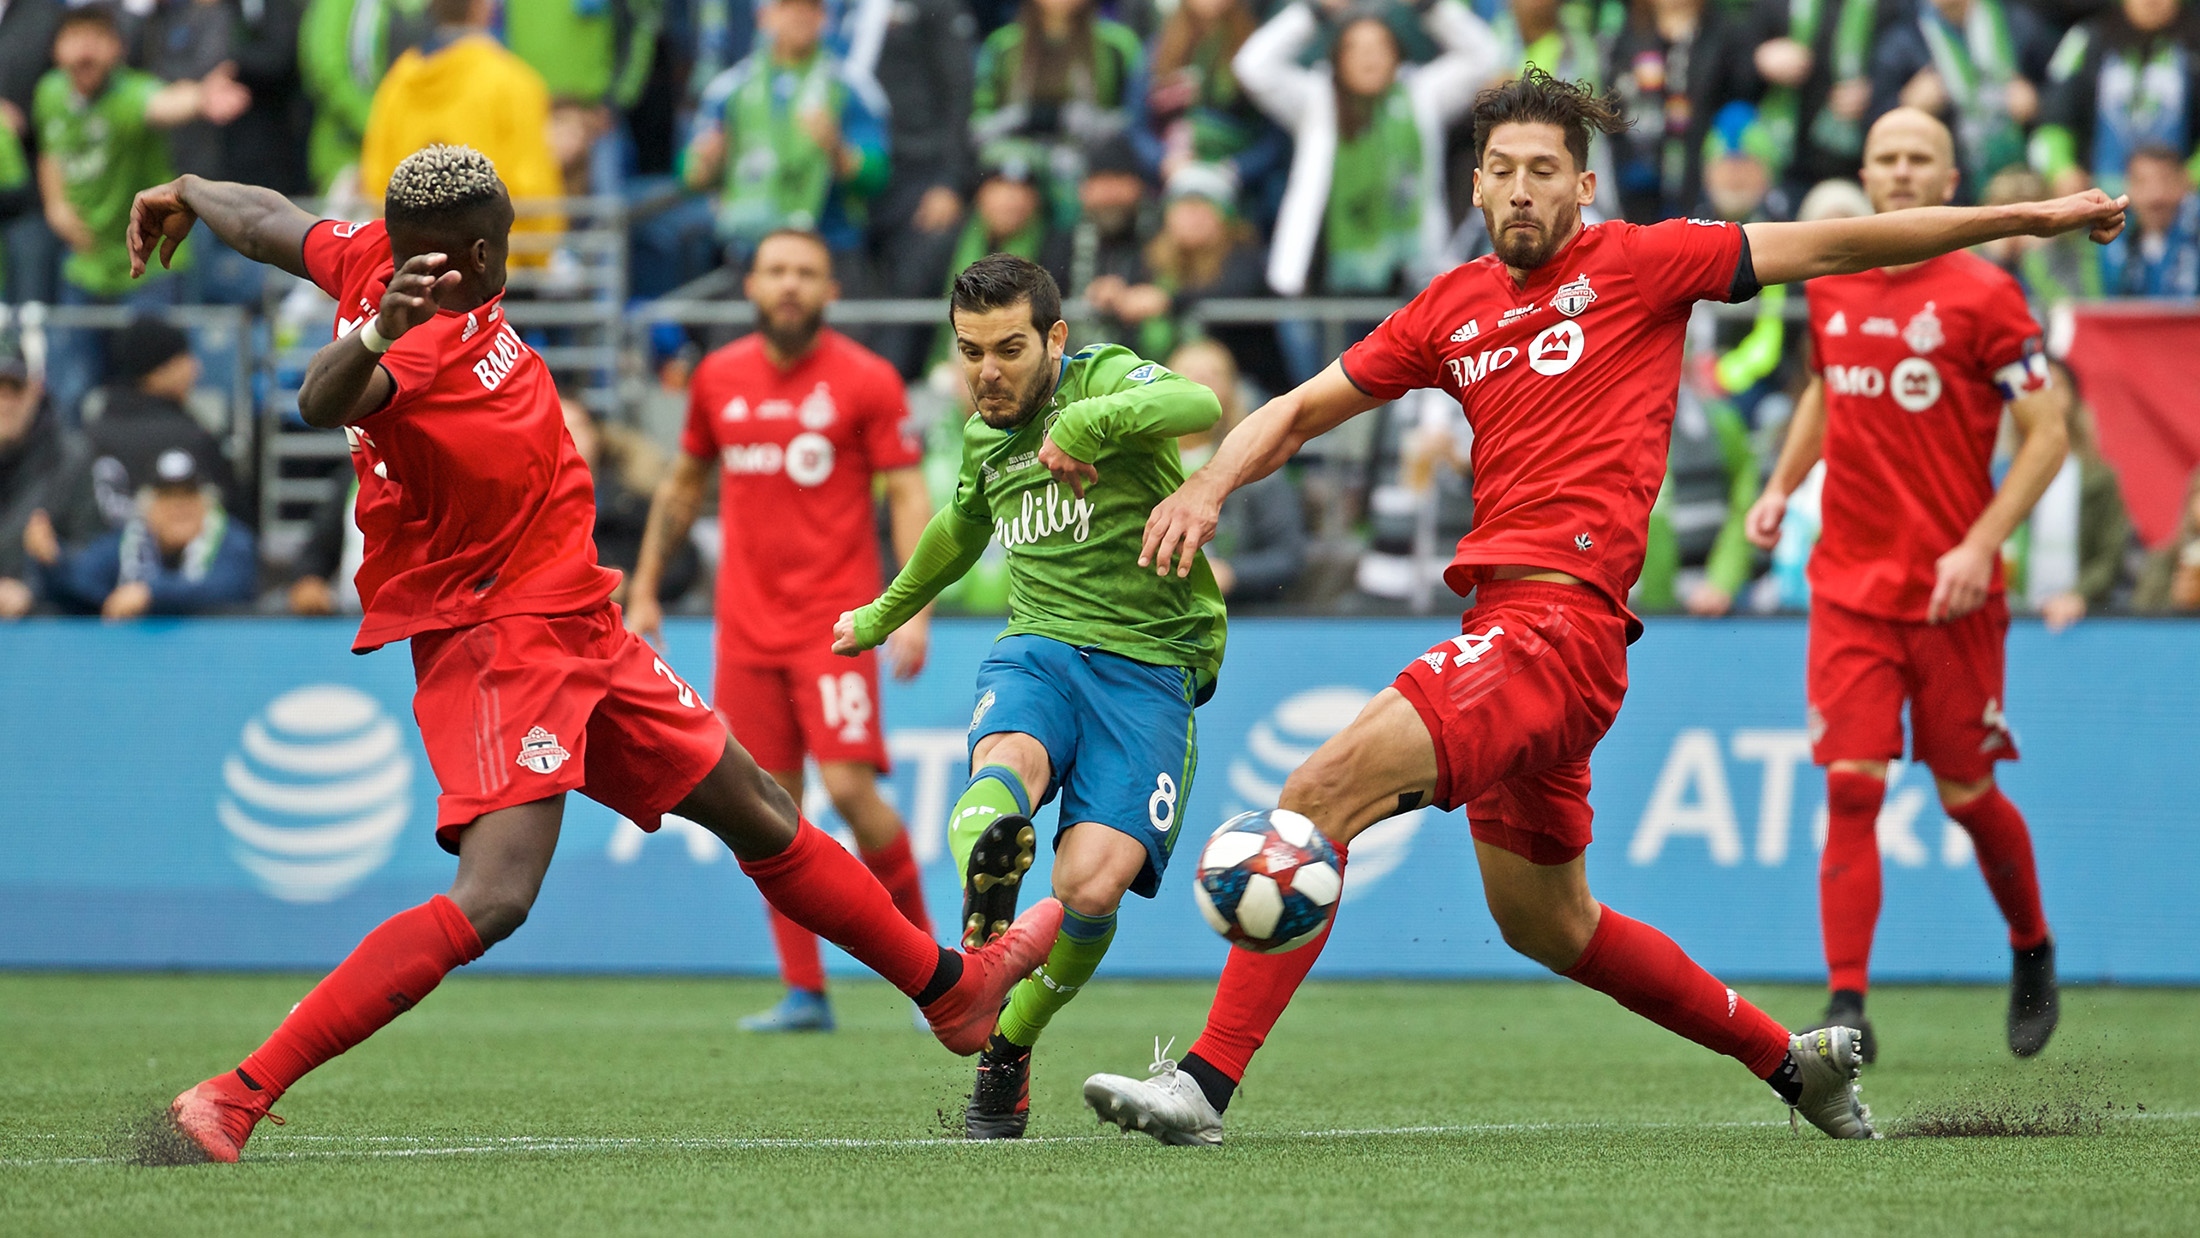 Major League Soccer: How the economics of co-branding will help the MLS  grow its business. Part 1